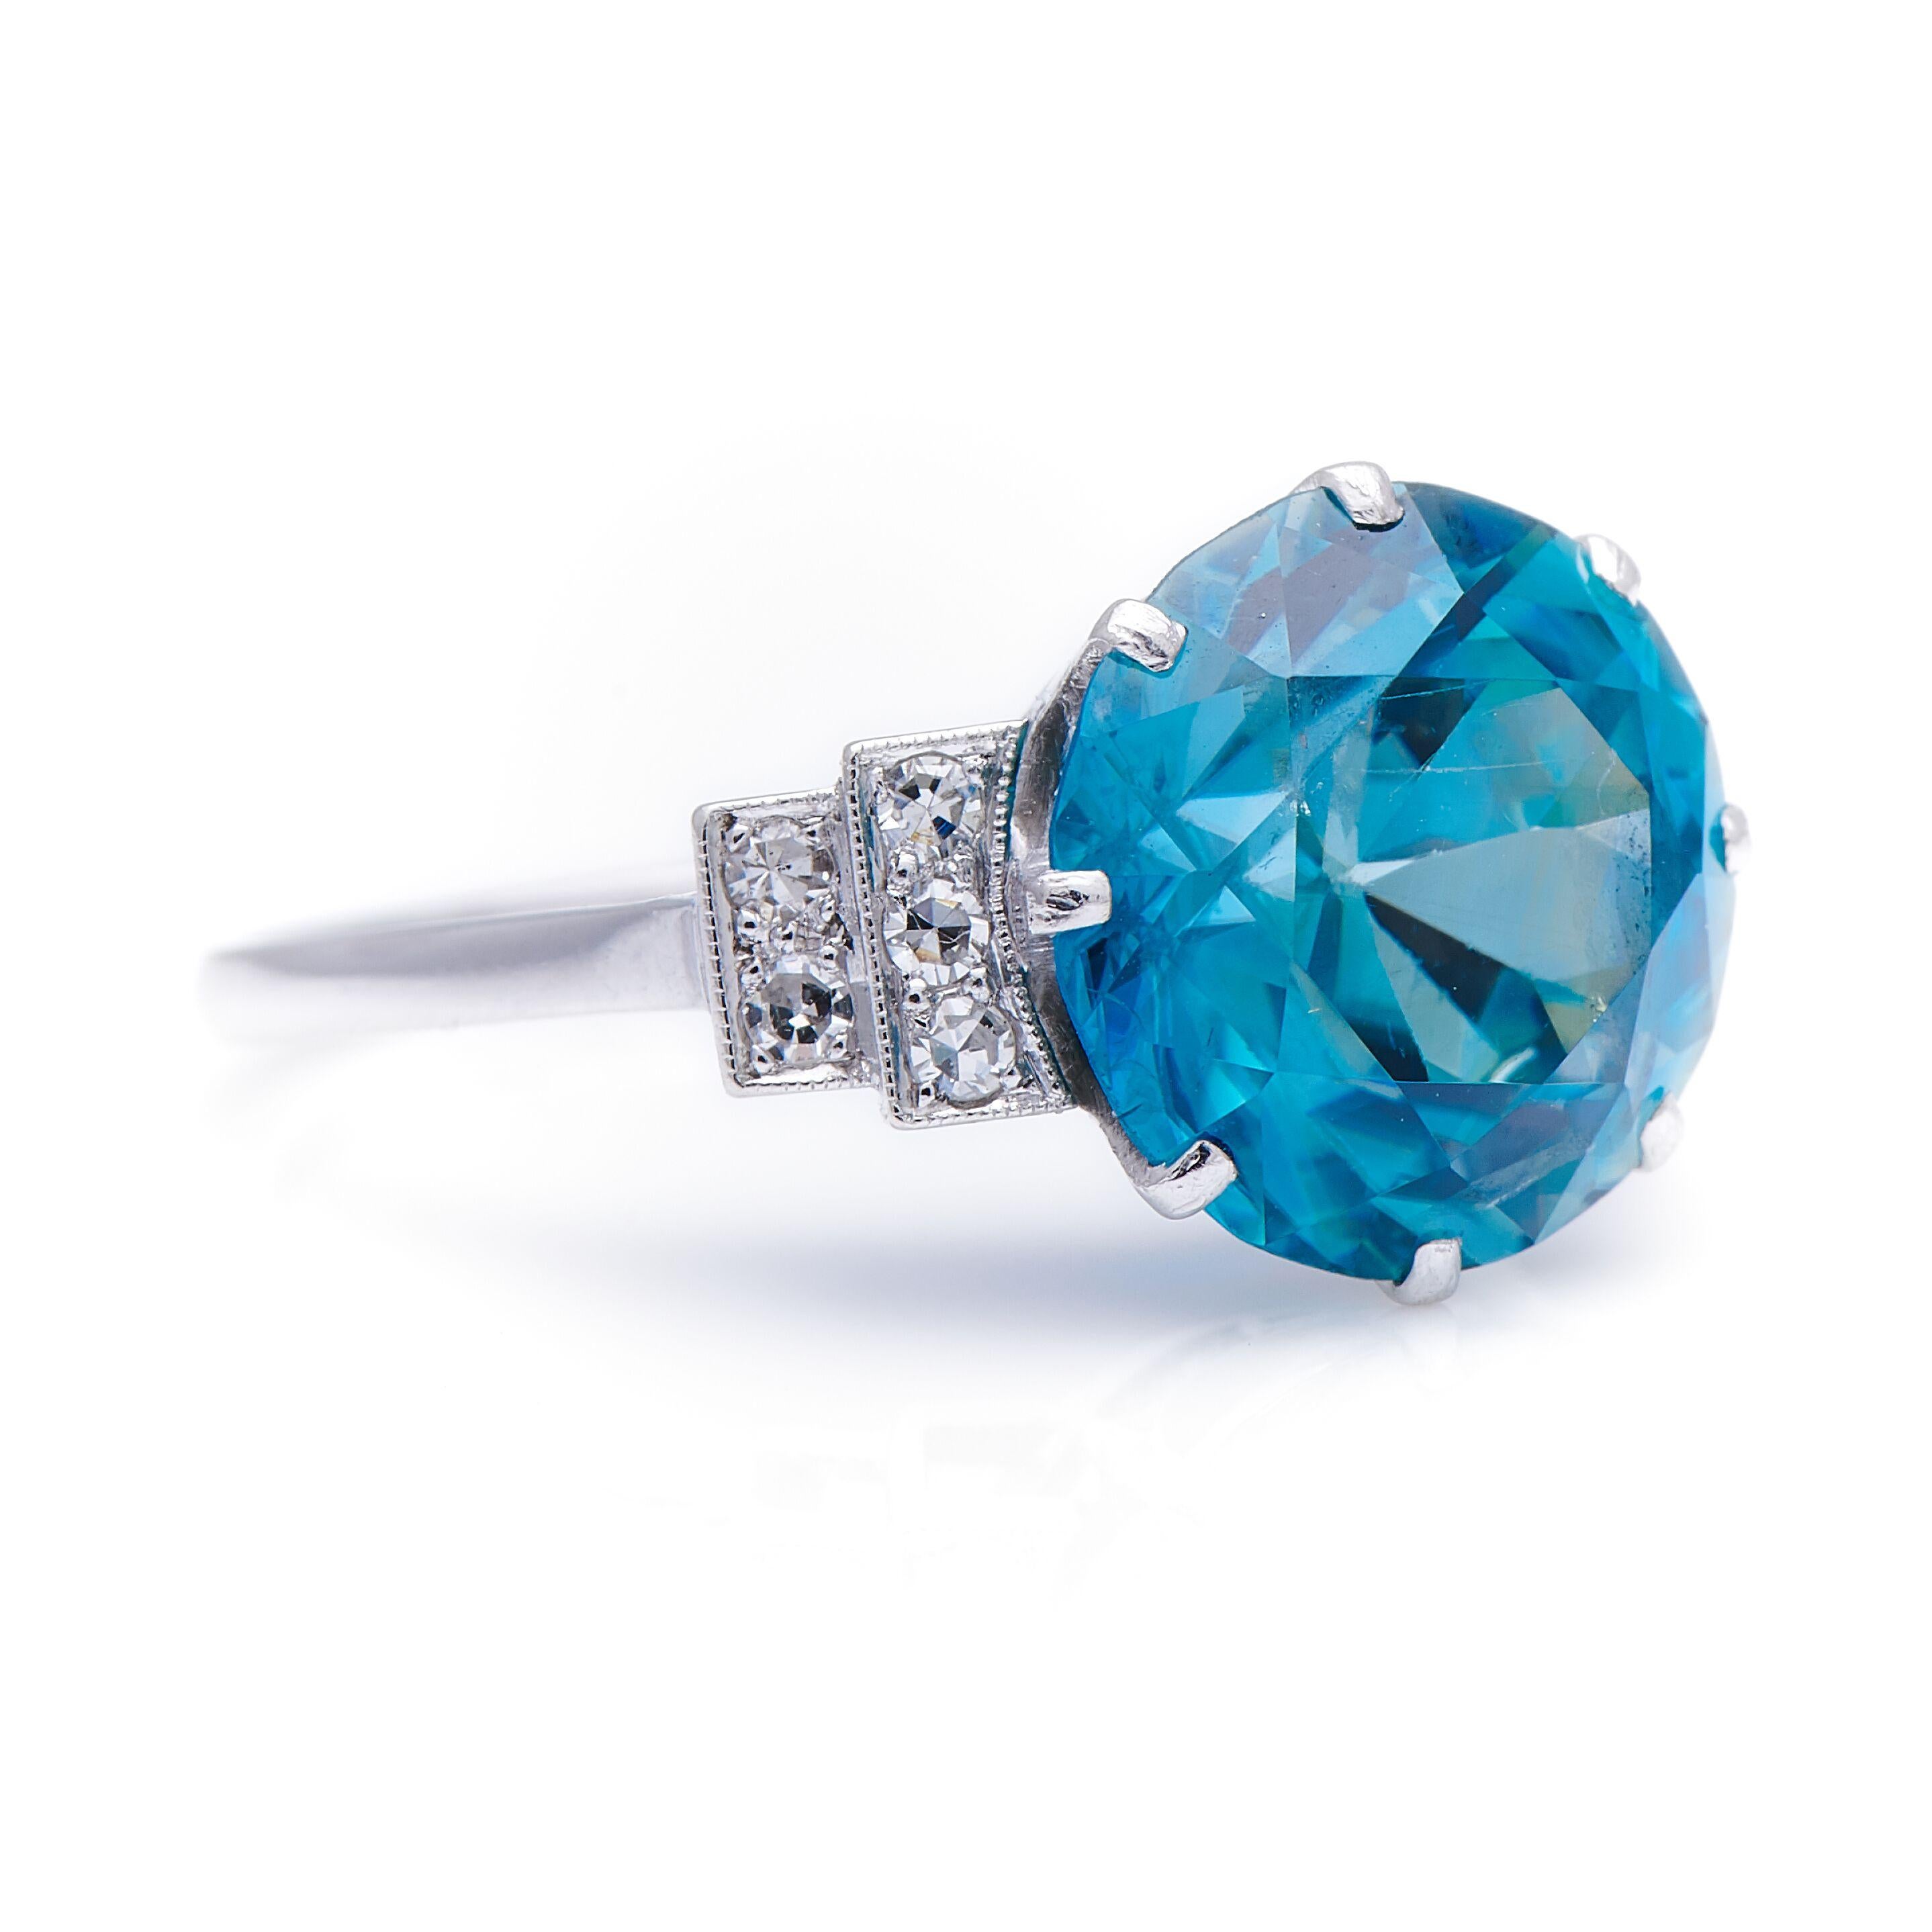 Zircon and diamond ring, circa 1920. Centring on a brilliant-cut blue zircon weighing 8.86 carats, to stepped shoulders set with single-cut diamonds within millegrain borders. Zircons have been prized for centuries for their superb lustre and